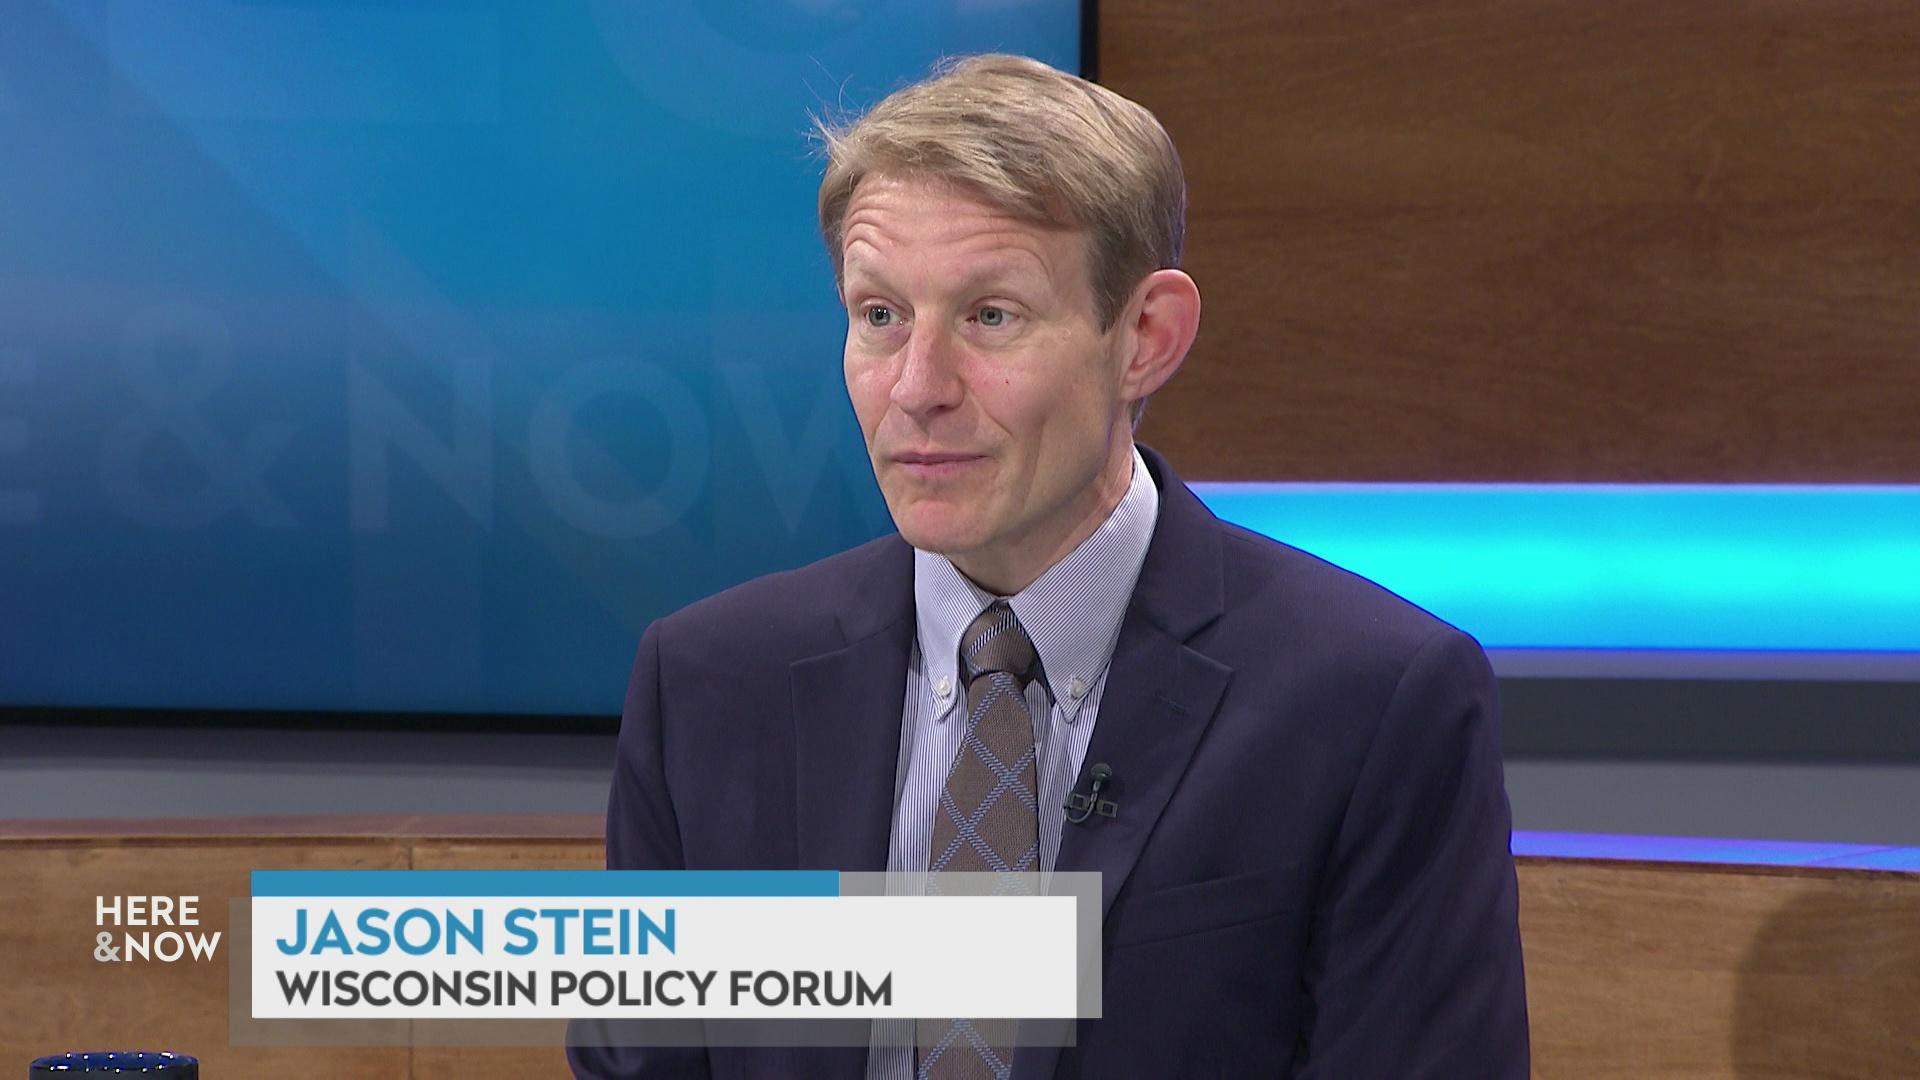 A still image shows Jason Stein seated at the 'Here & Now' set featuring wood paneling, with a graphic at bottom reading 'Jason Stein' and 'Wisconsin Policy Forum.'